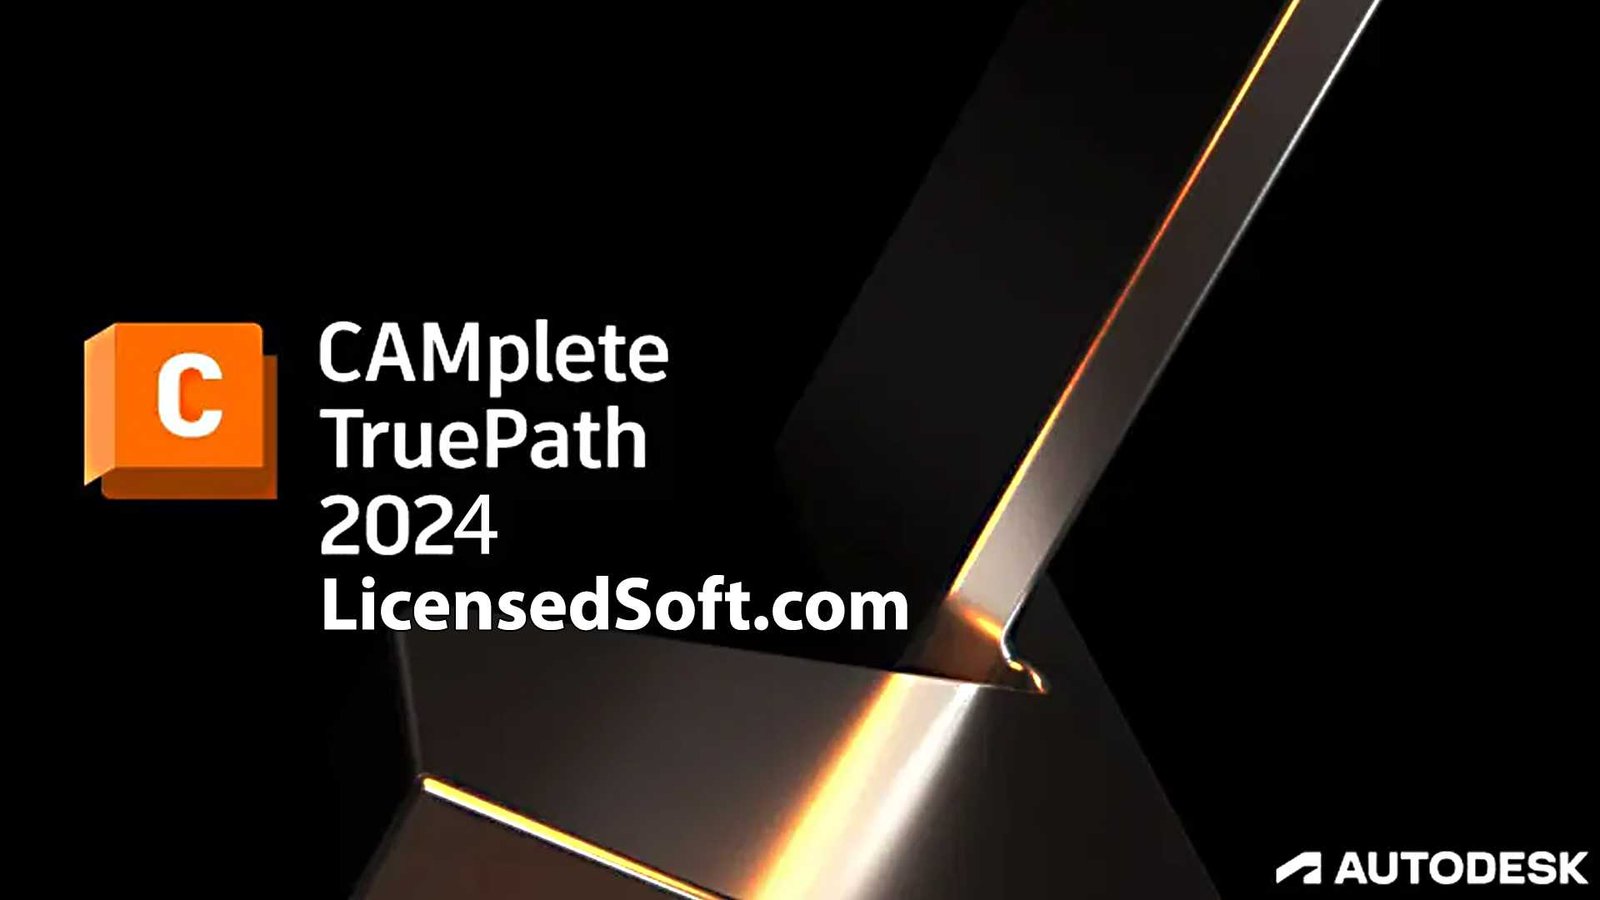 Autodesk CAMplete TruePath 2024.1 Cover Image By LicensedSoft